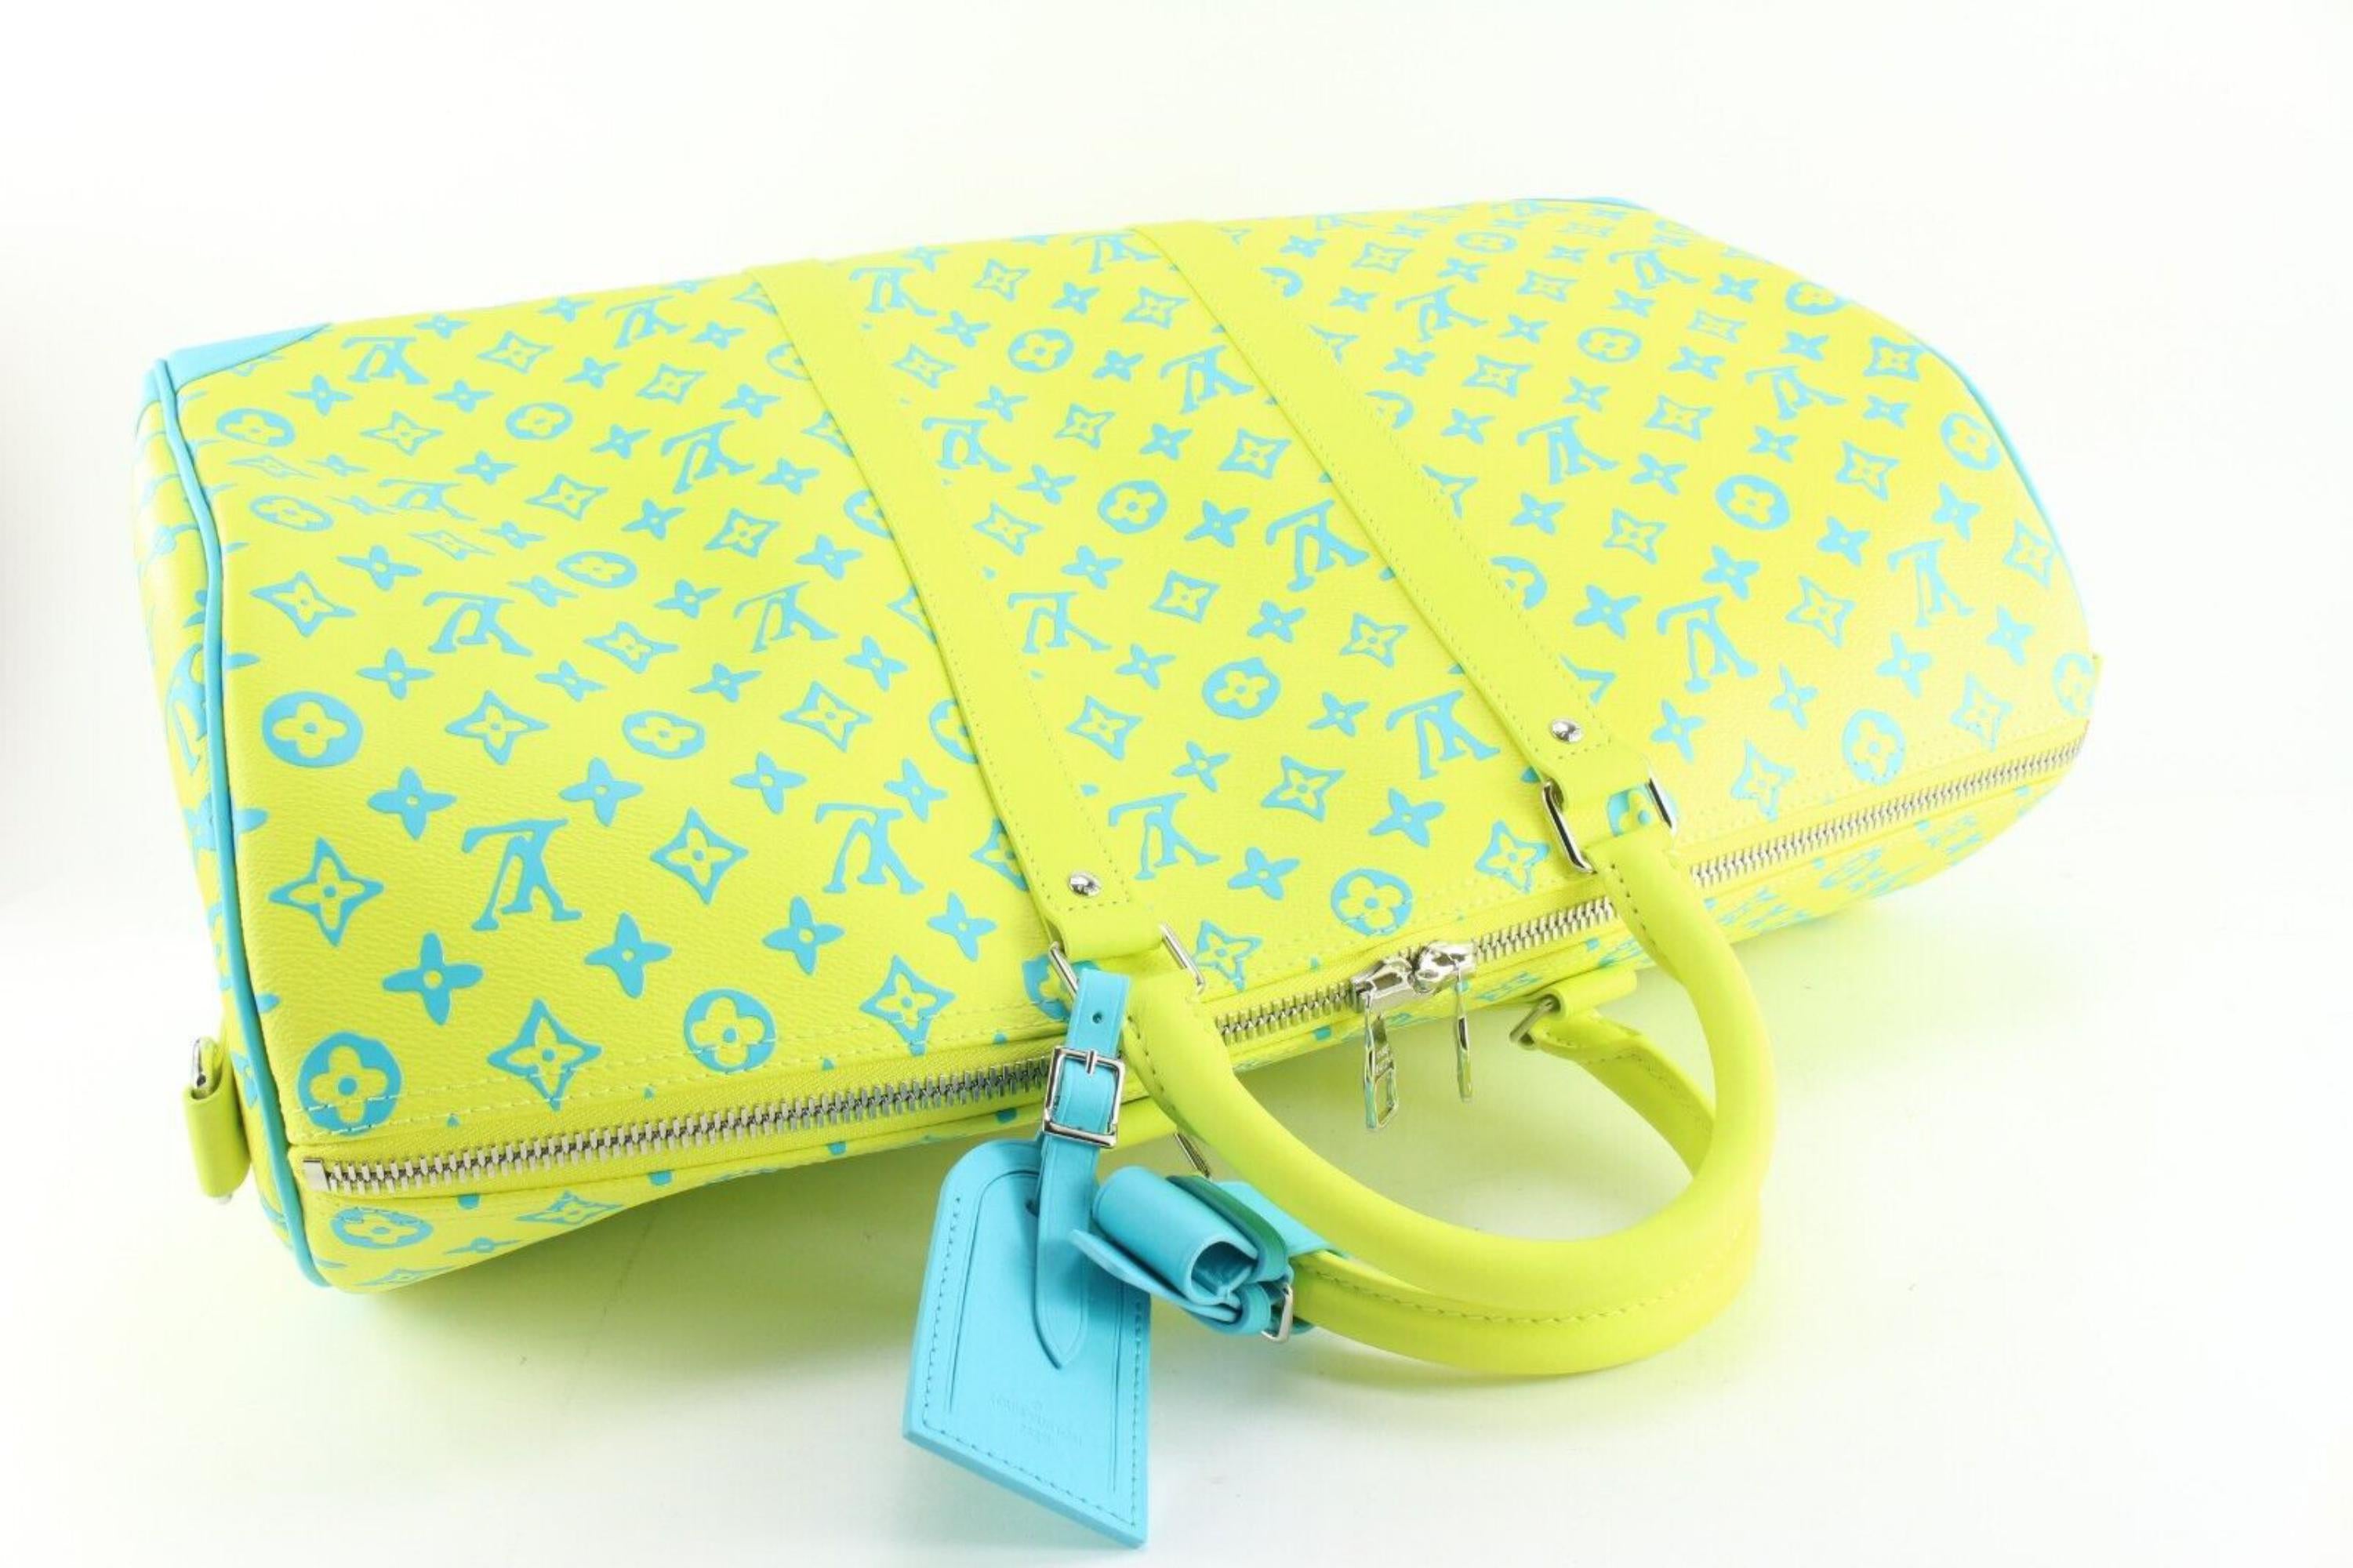 Louis Vuitton Monogram Bandouliere Strap With Yellow and Blue - A